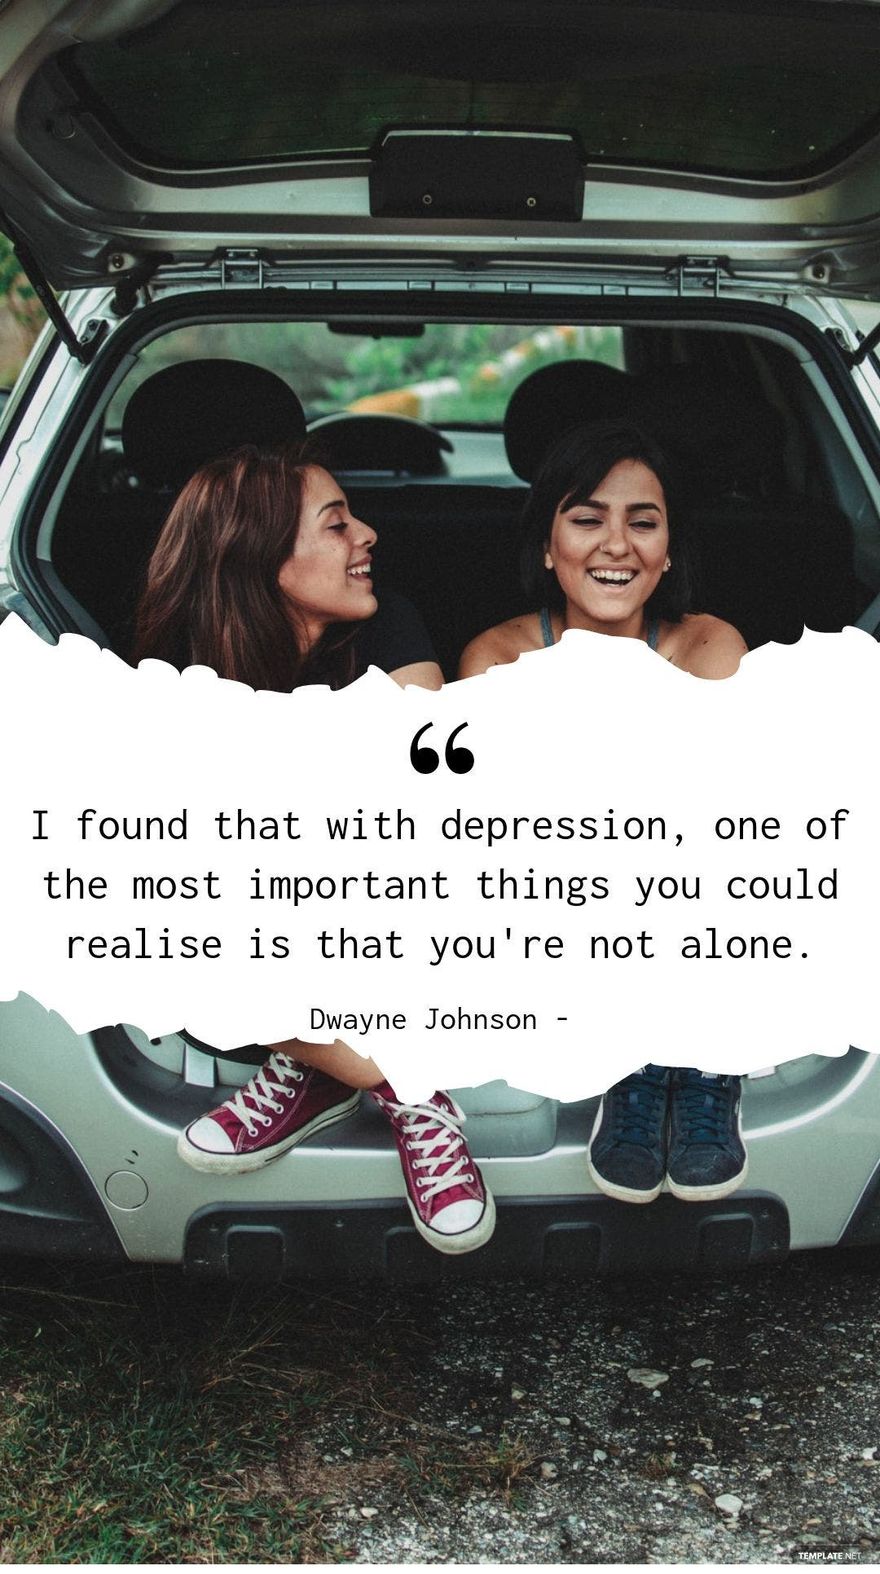 Dwayne Johnson - I found that with depression, one of the most important things you could realise is that you're not alone.